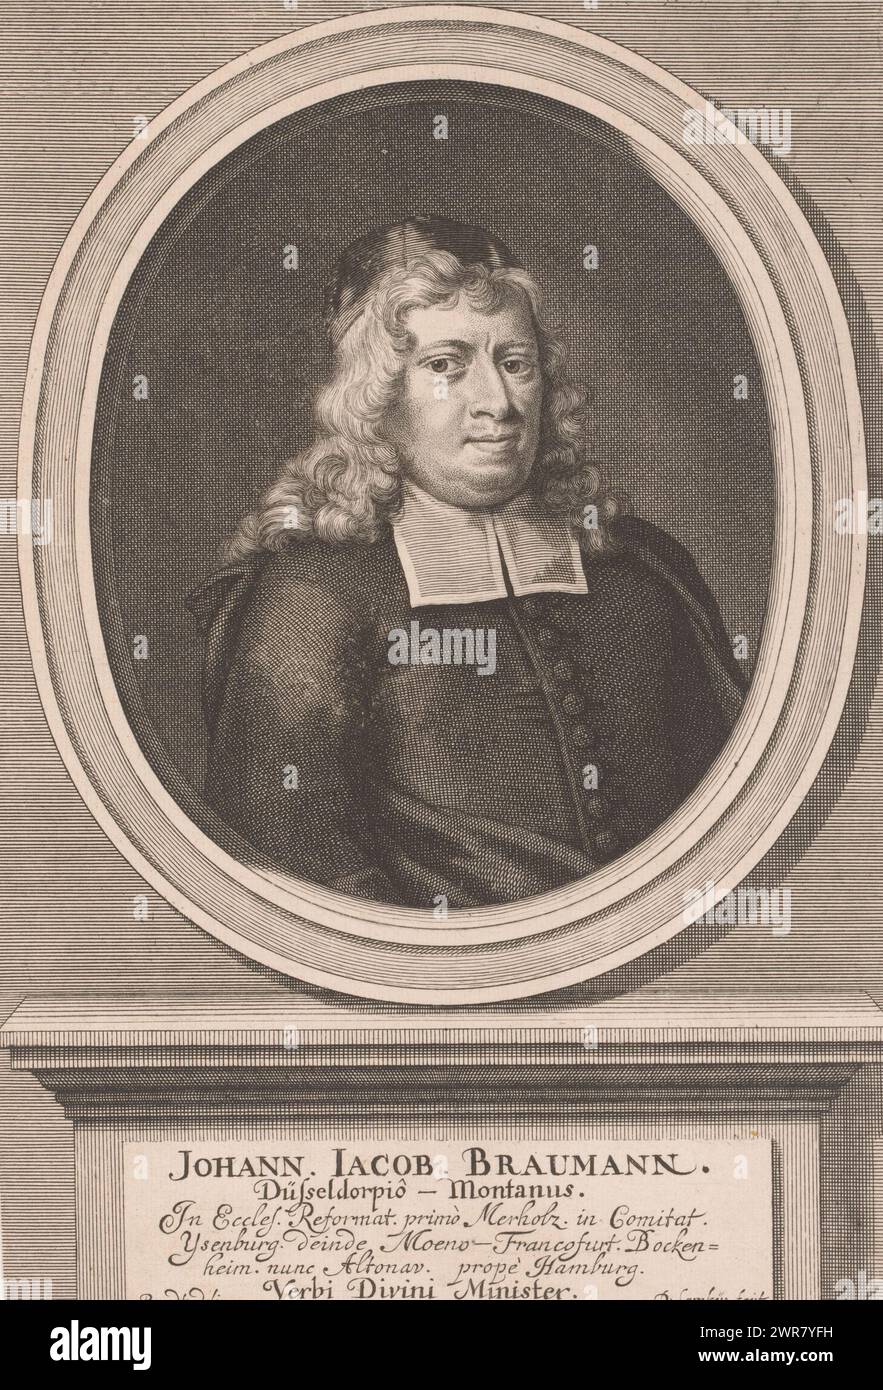 Portrait of Johann Jacob Braumann, Text in Latin on the pedestal., print maker: Diederich Lemkus, after drawing by: Hans Hinrich Rundt, 1703 - 1730, paper, engraving, height 249 mm × width 169 mm, print Stock Photo